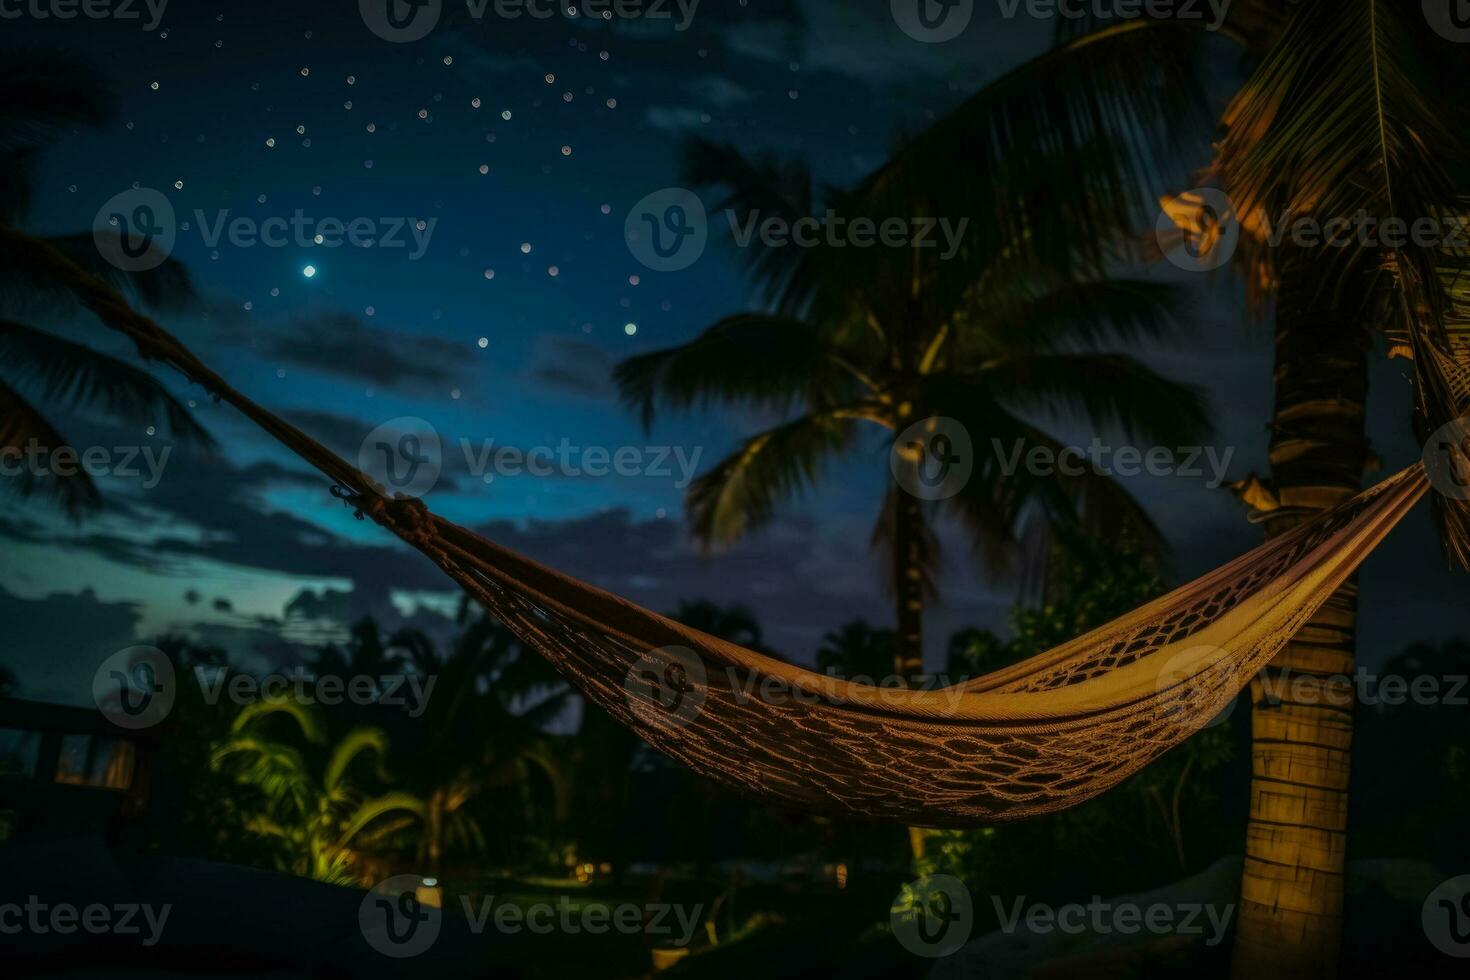 Star gazing in hammocks wrapped in warmth of New Years tropical night photo